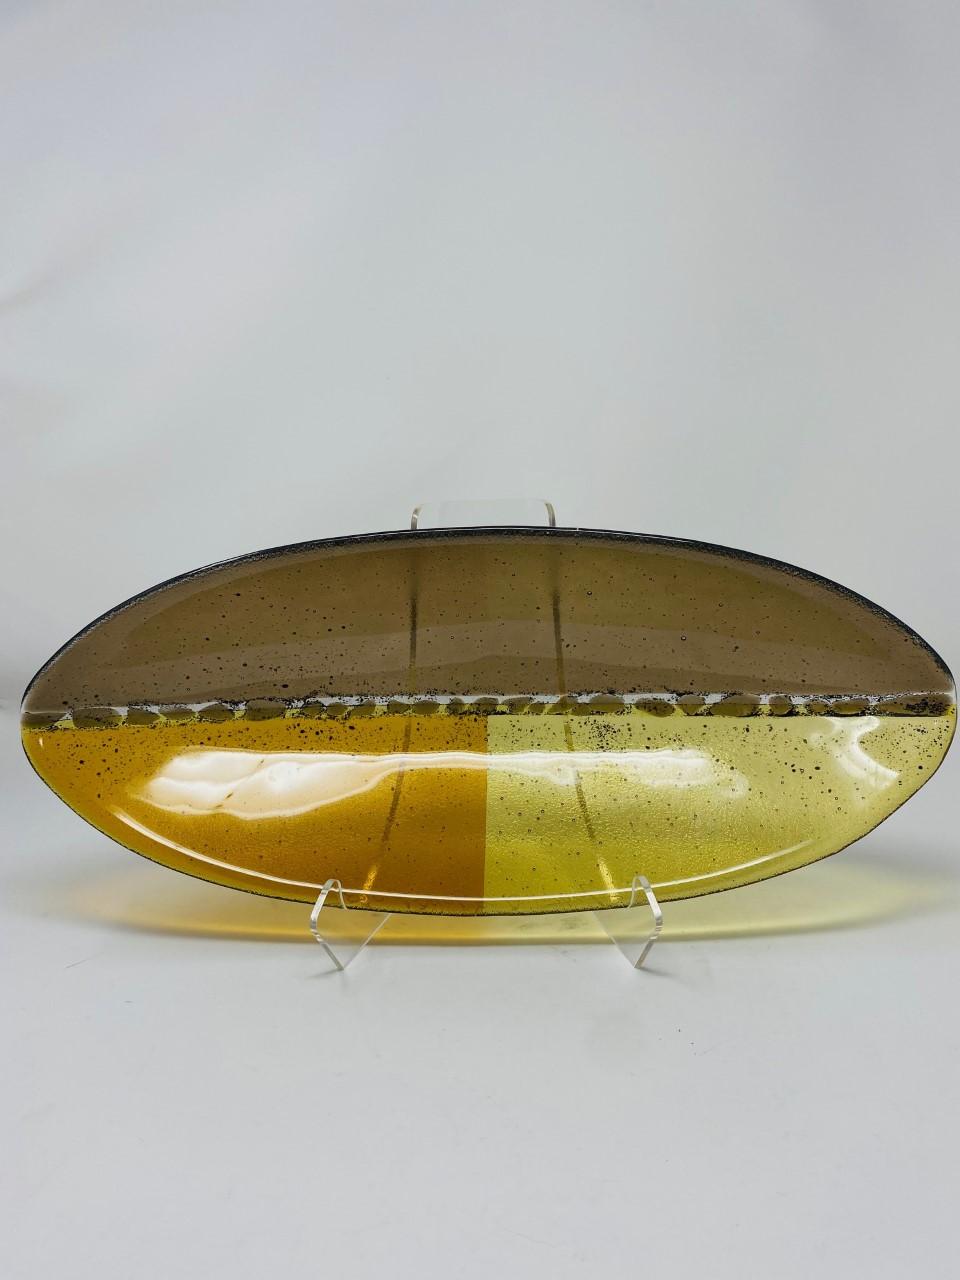 Beautiful and graphic oval glass art bowl by Rosenthal. This beautiful piece from the late 90s is graphic and detailed. It shares yellow and amber tones along with a smoke purple tone in a canoe like shape. The piece is eye catching and minimal. A